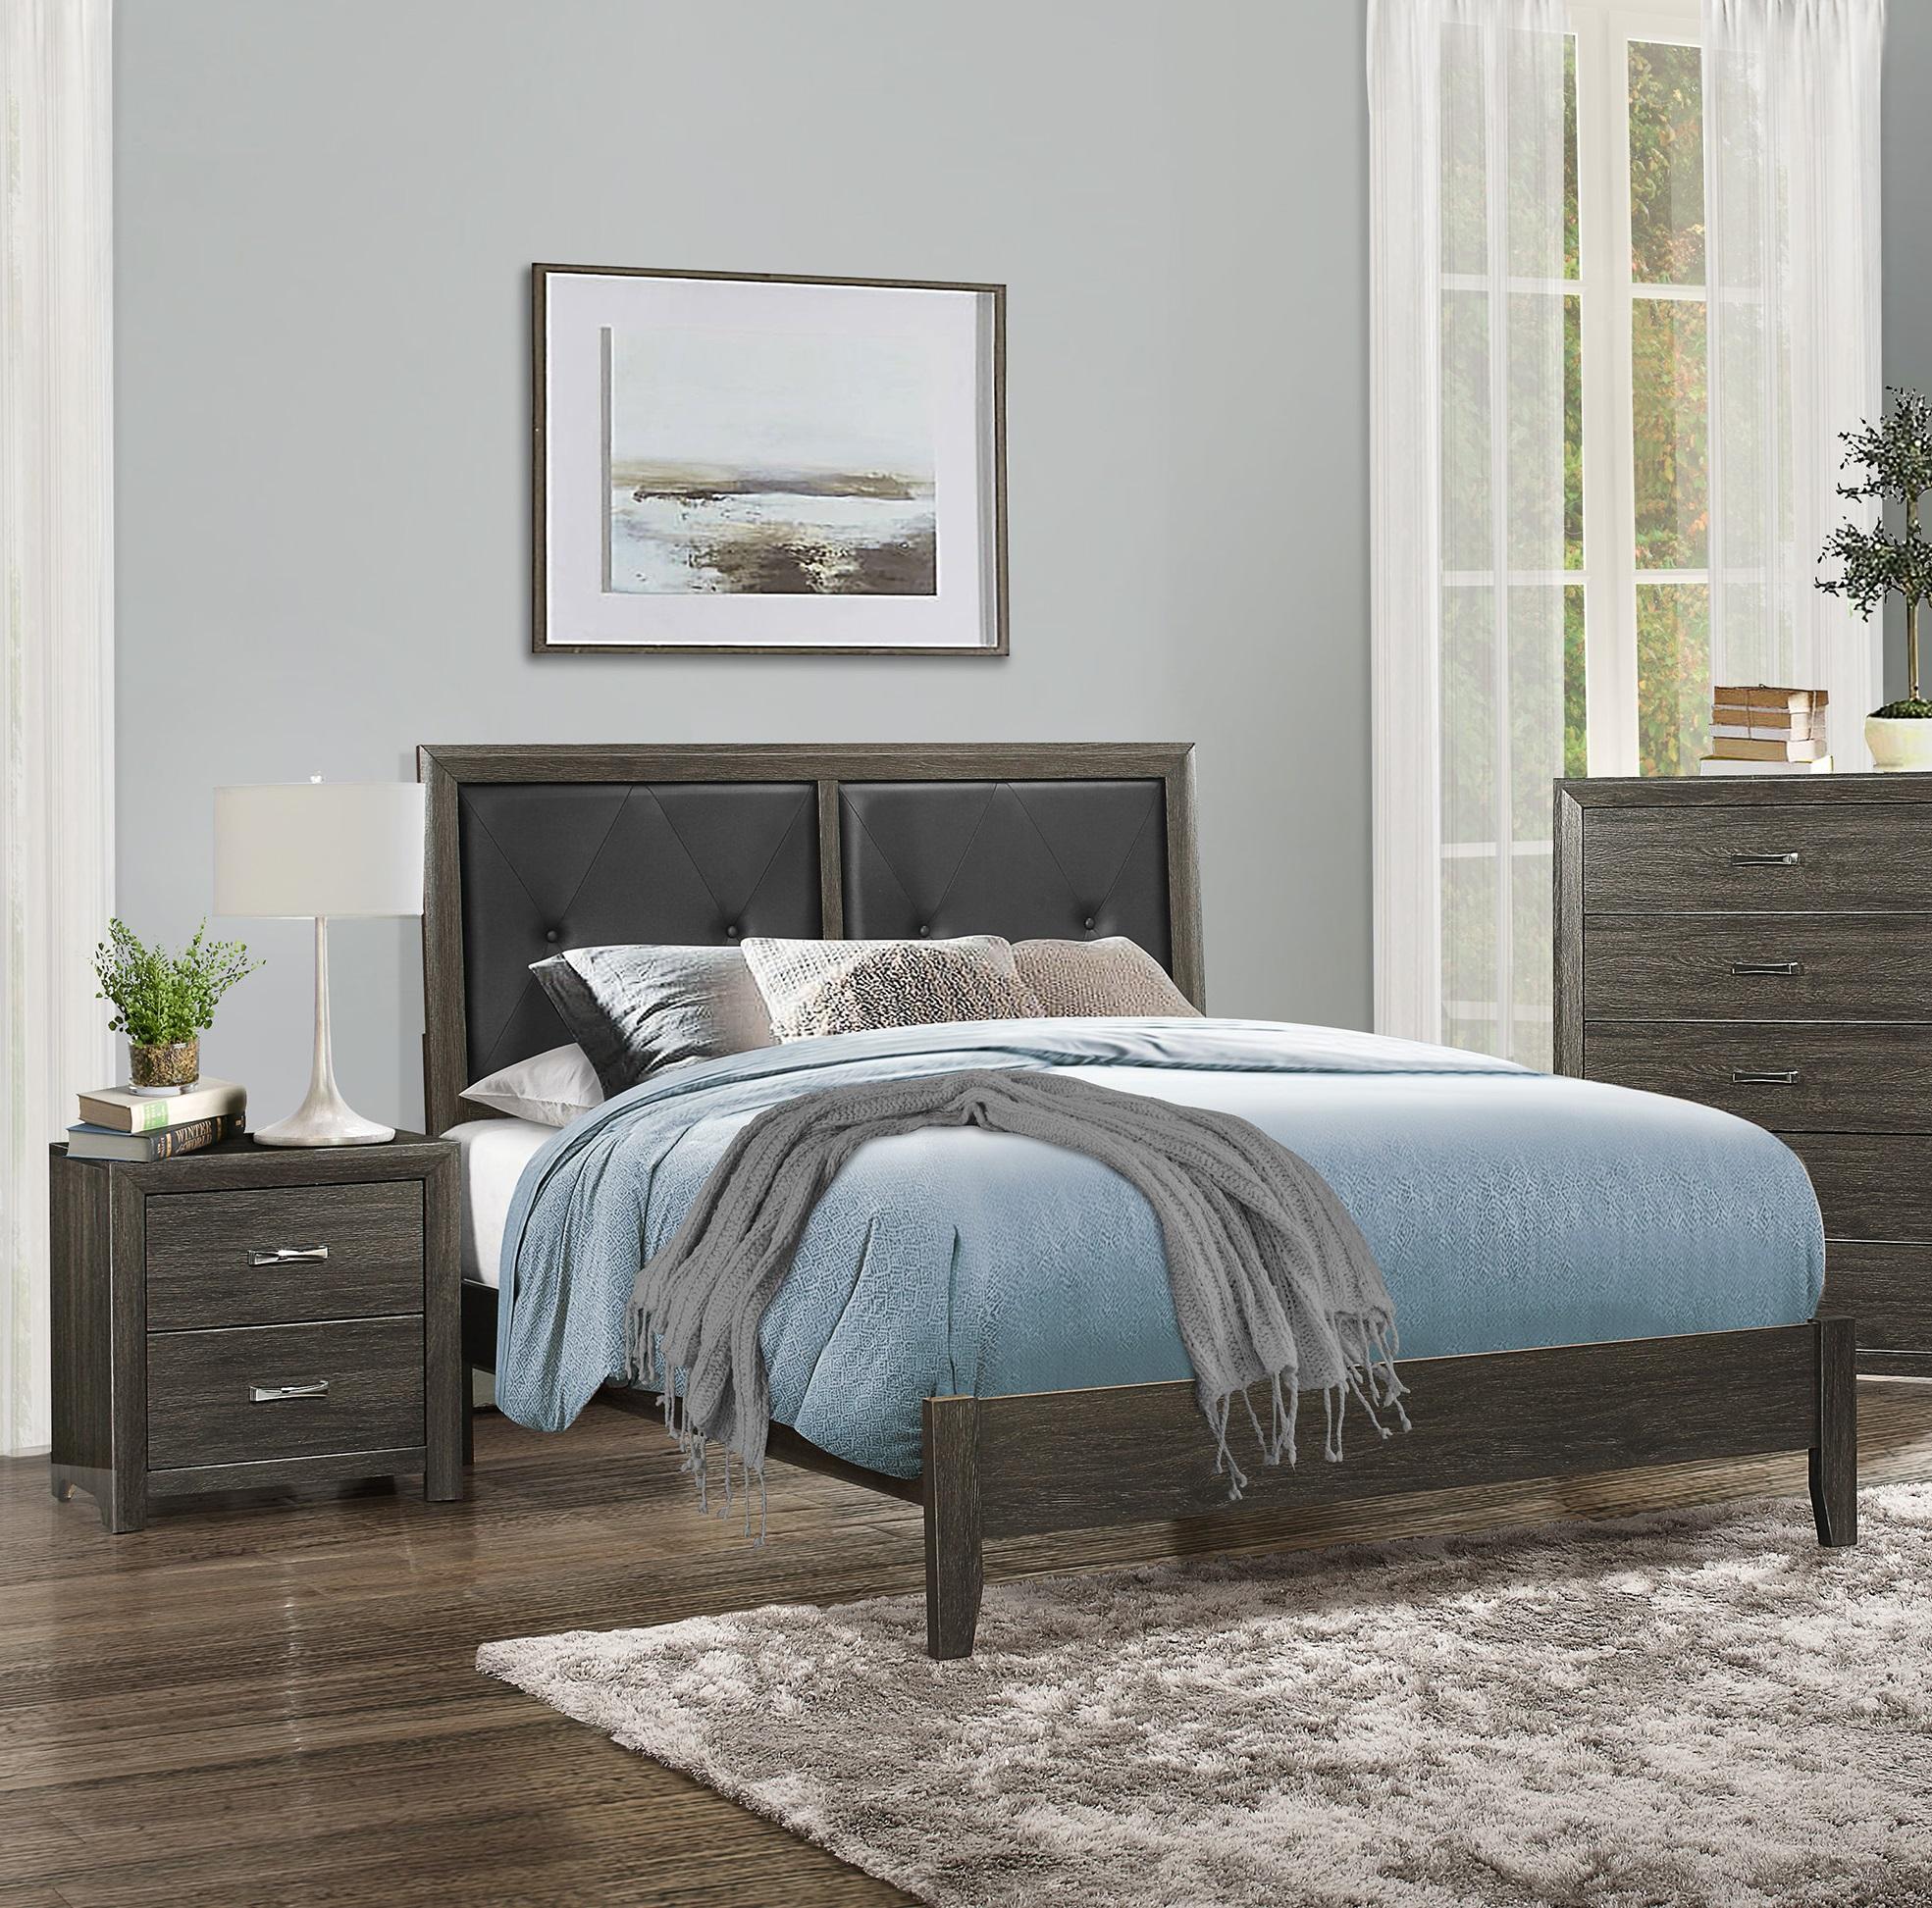 Contemporary Bedroom Set 2145NP-1-3PC Edina 2145NP-1-3PC in Dark Gray Faux Leather